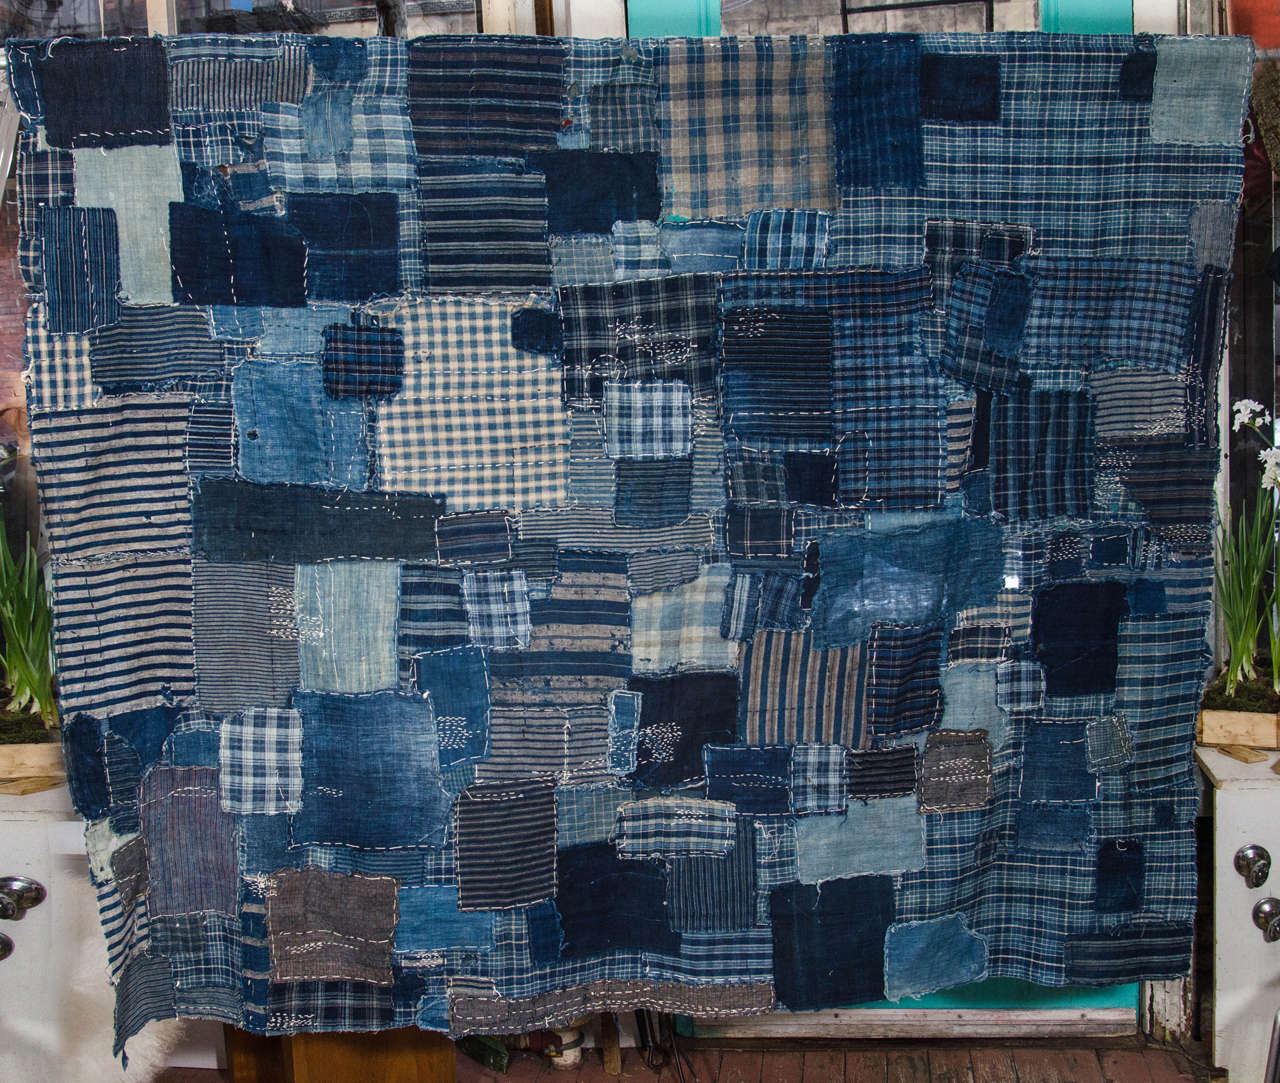 Japanese Edo period Boro. Patchwork hand-sewn indigo dyed fabric made from 19th century Japanese hand loomed futon fabric, with heavy repair.
View.